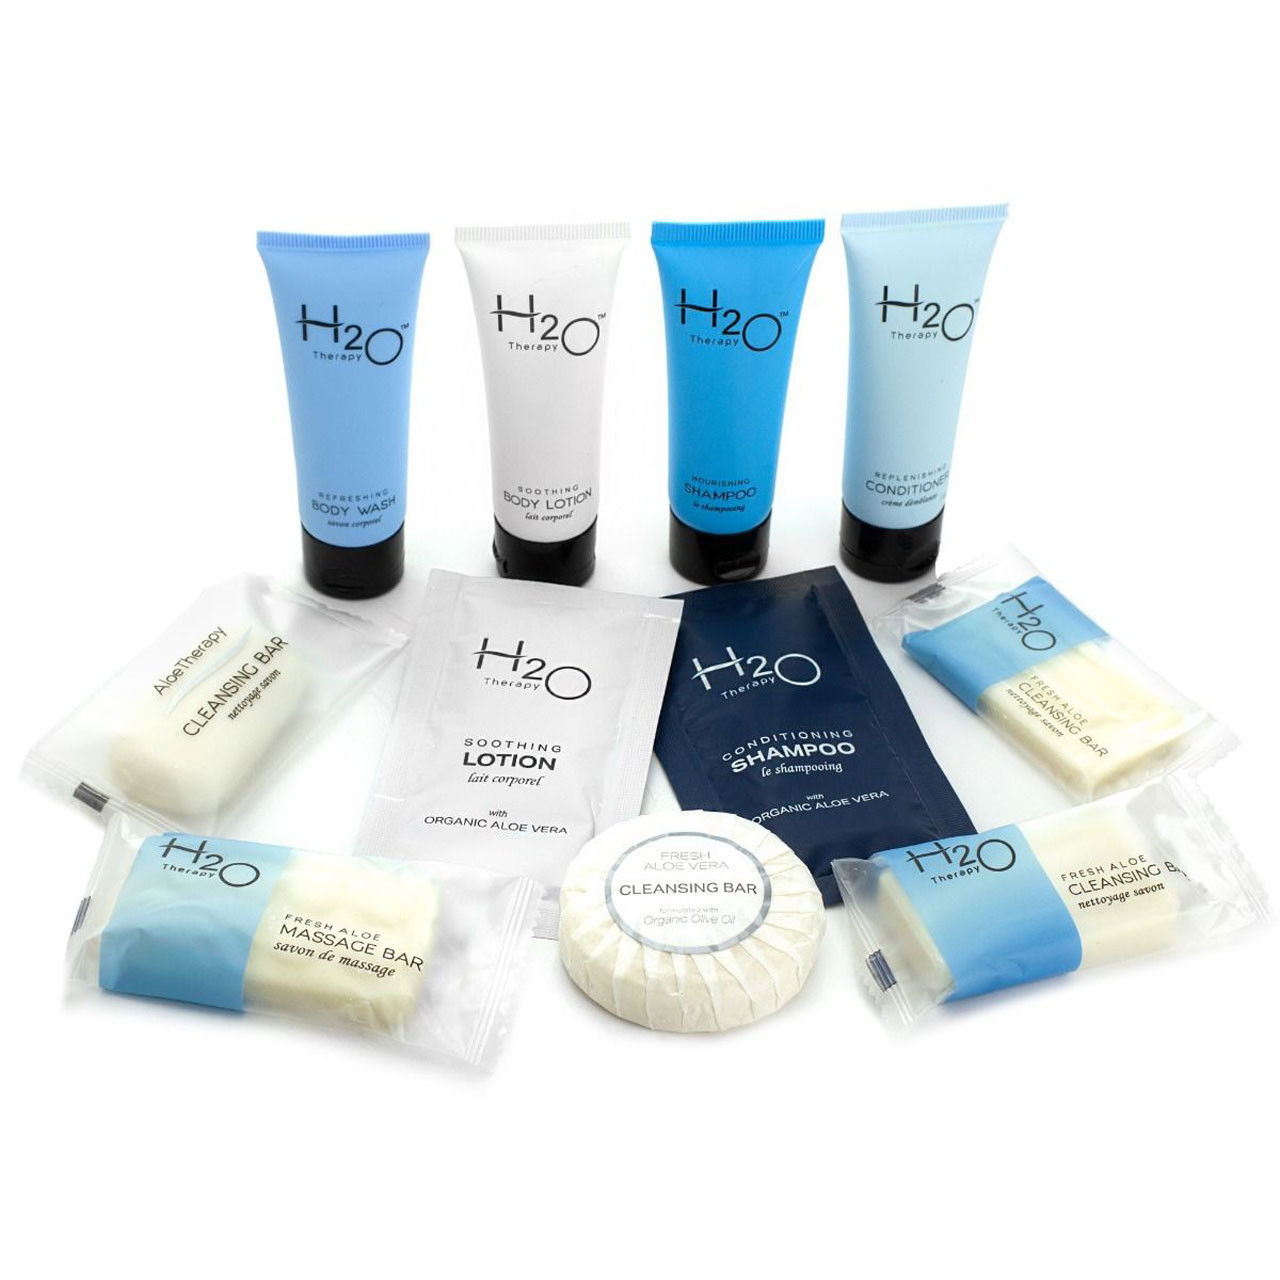 What is the base for the citrus massage and cleansing bars in the H2O Therapy Collection?